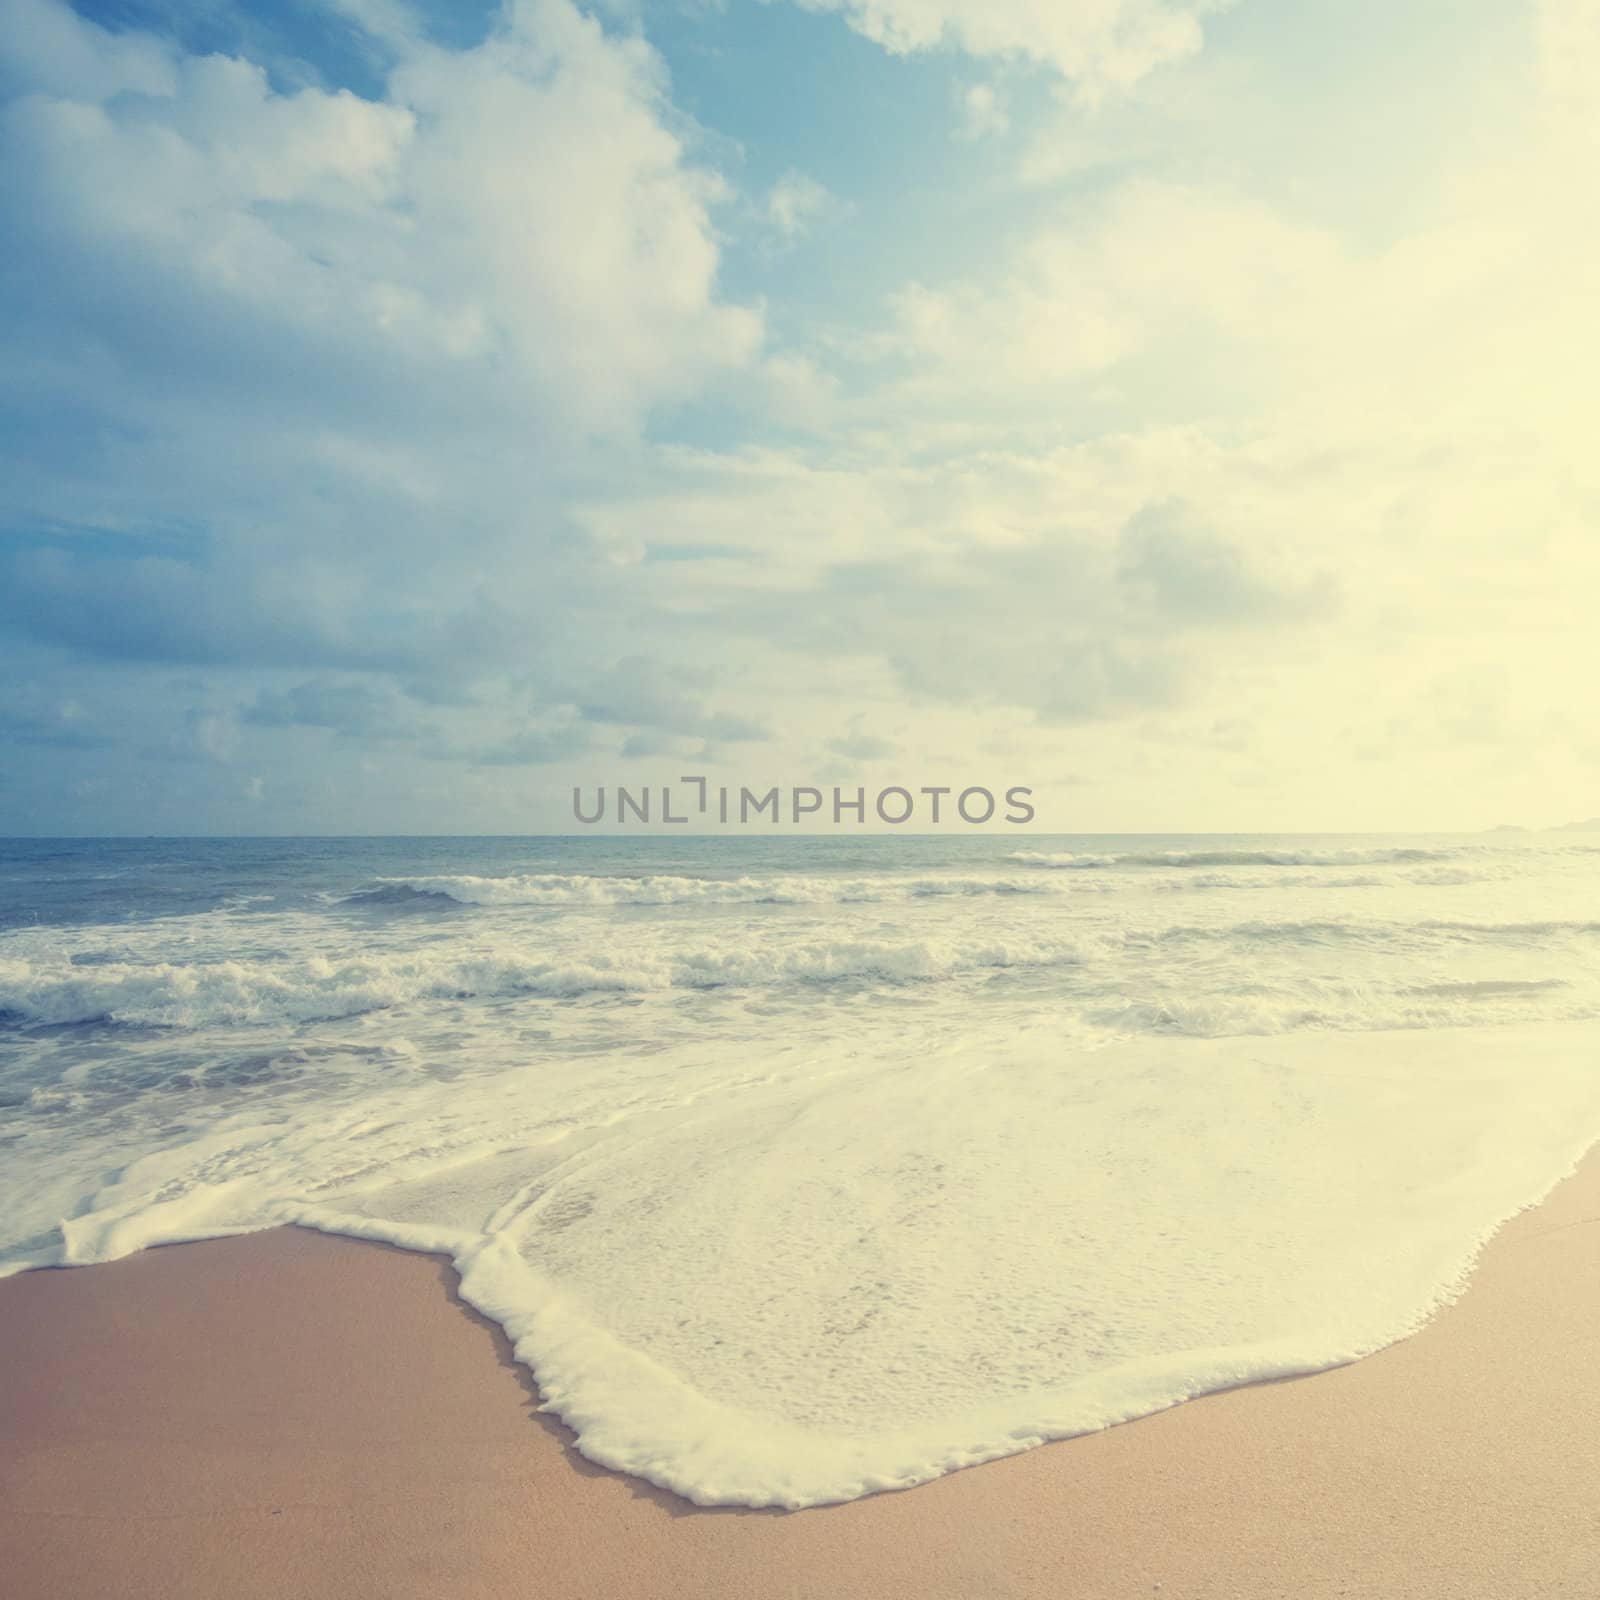 Retro vintage style summer beach sea view with wave, Malaysia